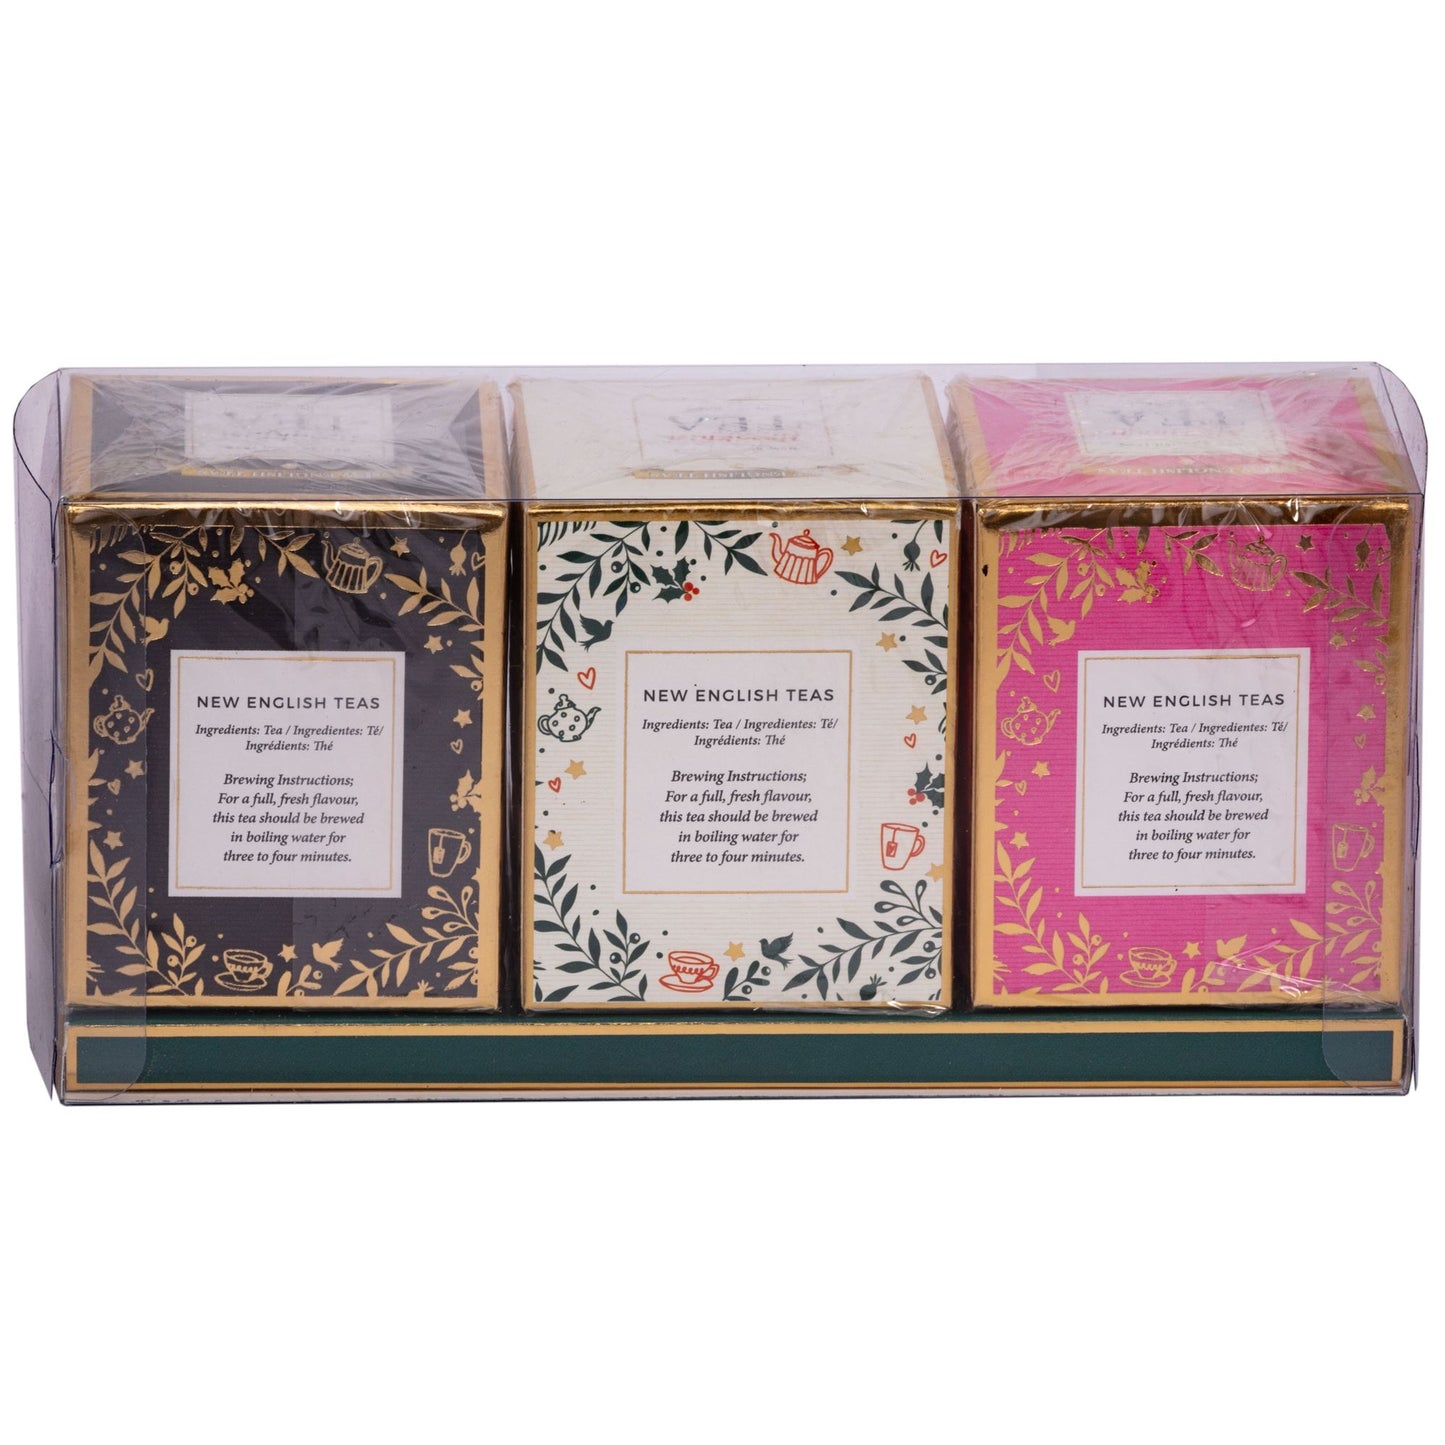 Festive Tea Carton Gift Pack with 30 English Teabags - Pink, Ivory & Grey New English Teas 